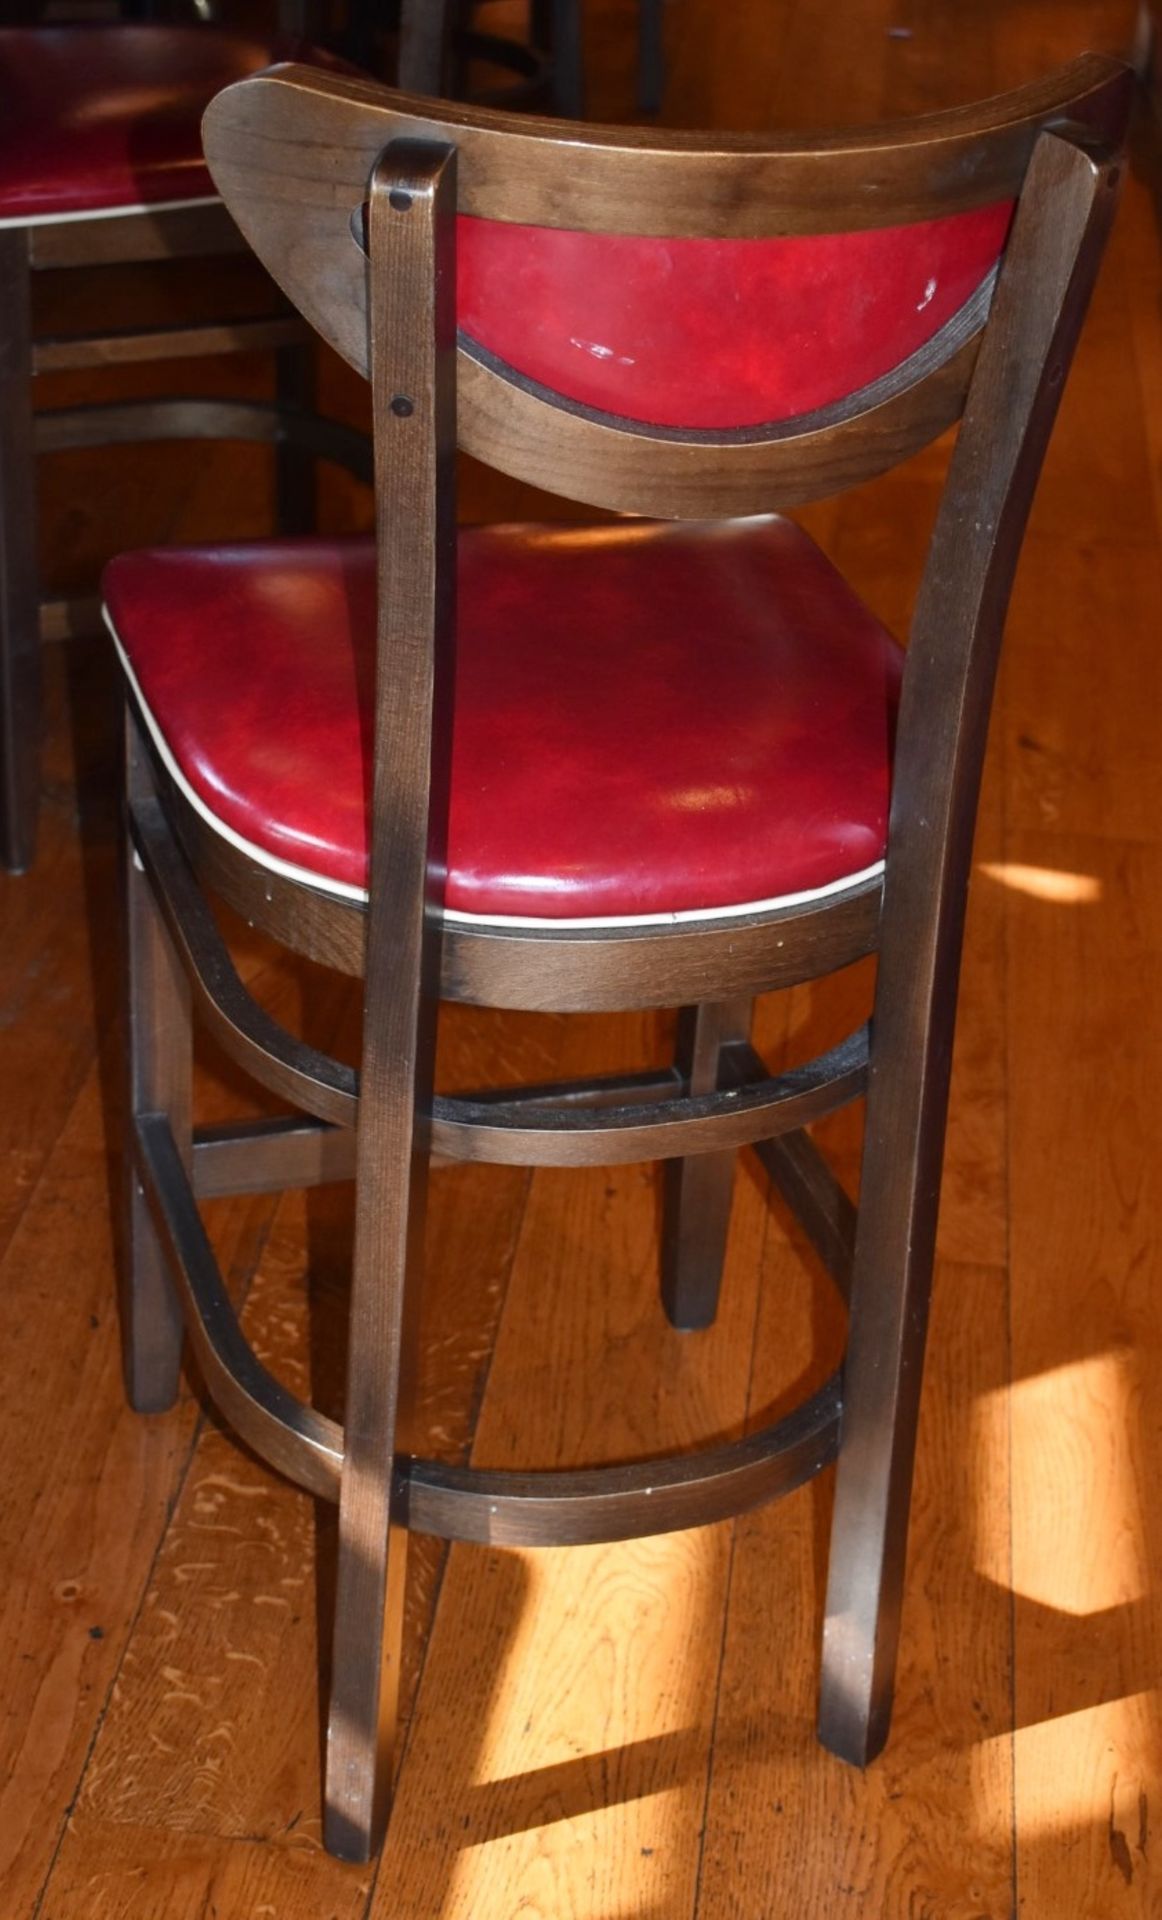 4 x Wine Red Faux Leather Bar Stools From Italian American Restaurant - Retro Design With Dark - Image 3 of 5